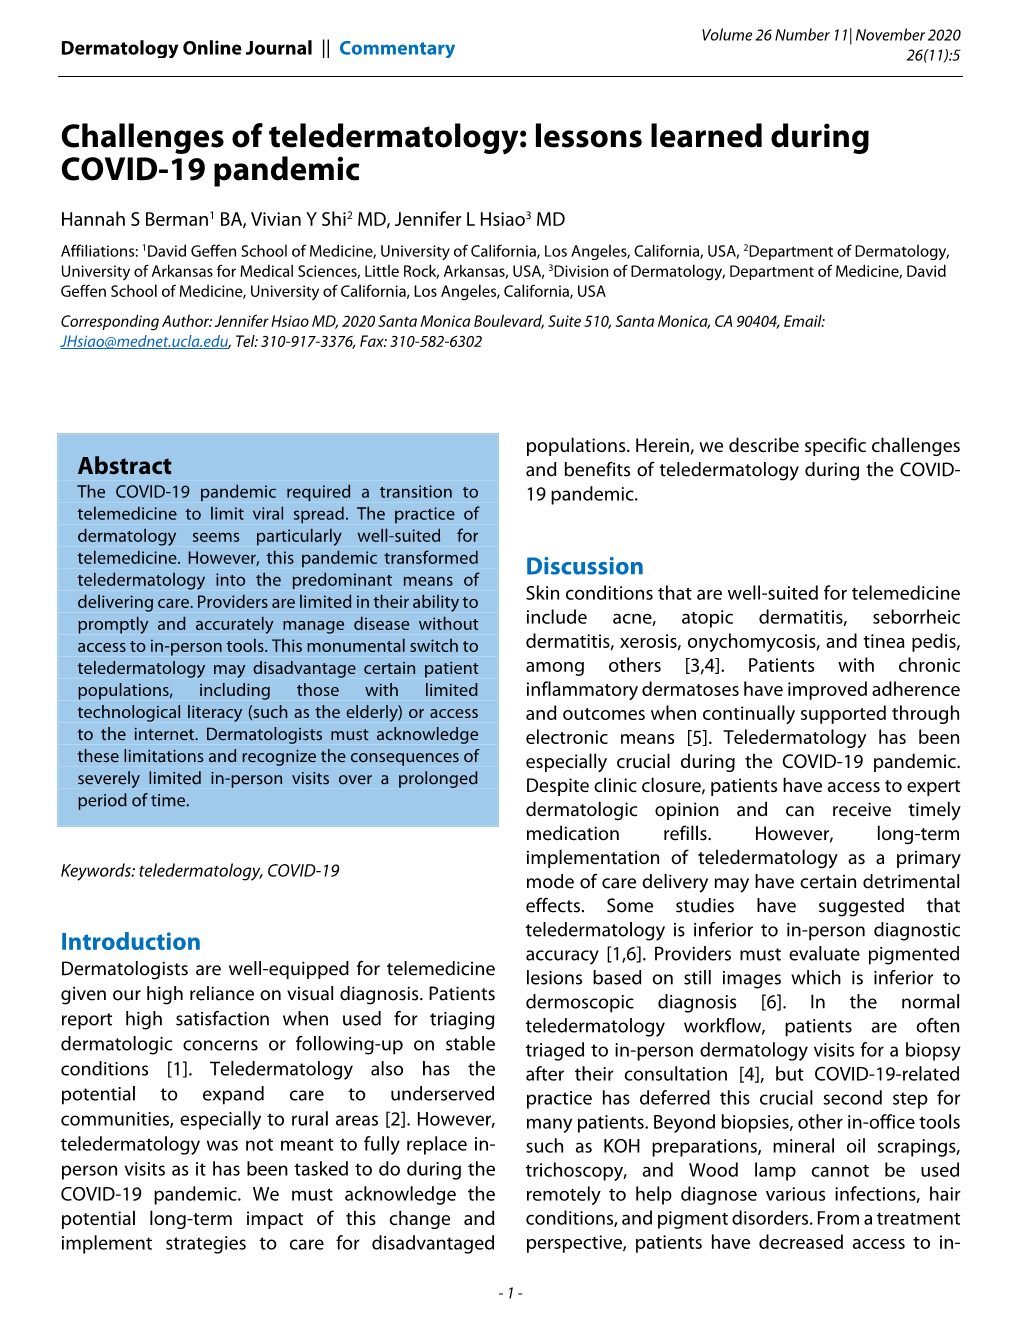 Challenges of Teledermatology: Lessons Learned During COVID-19 Pandemic